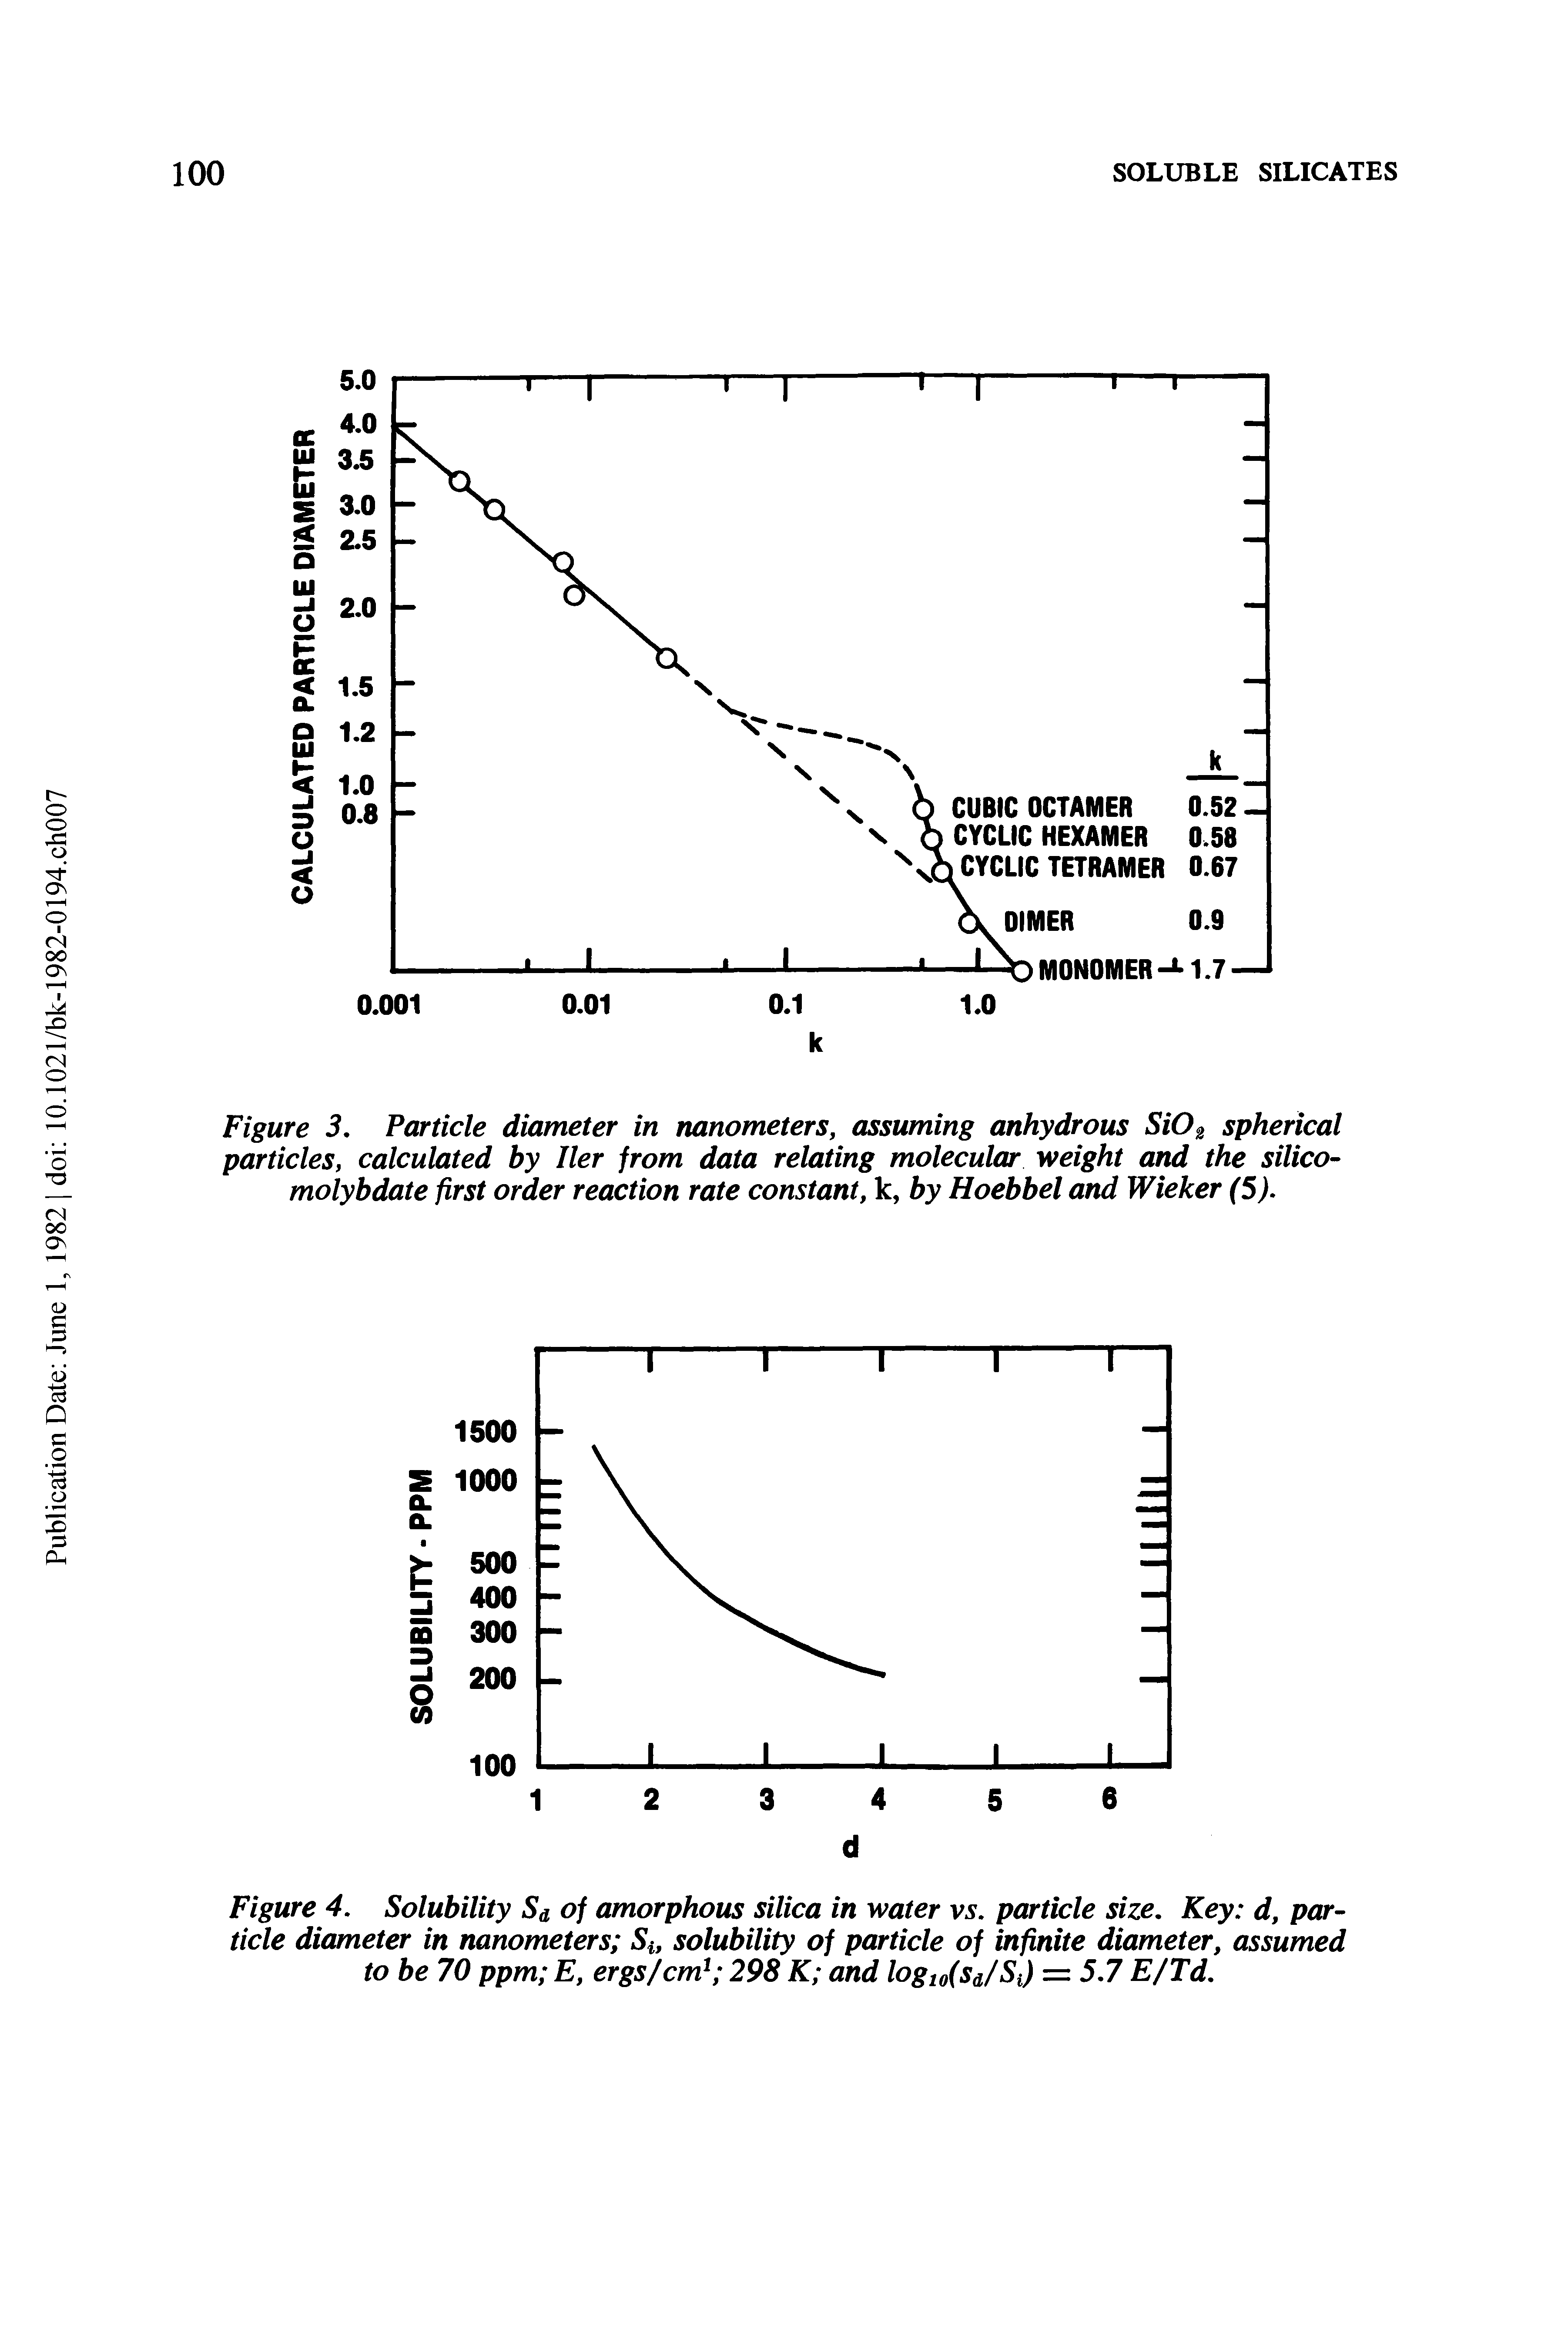 Figure 4. Solubility Sa of amorphous silica in water V5. particle size. Key d, particle diameter in nanometers Si, solubility of particle of infinite diameter, assumed to be 70 ppm E, ergs/cm 298 K and logiofsa/SJ = 5.7 E/Td.